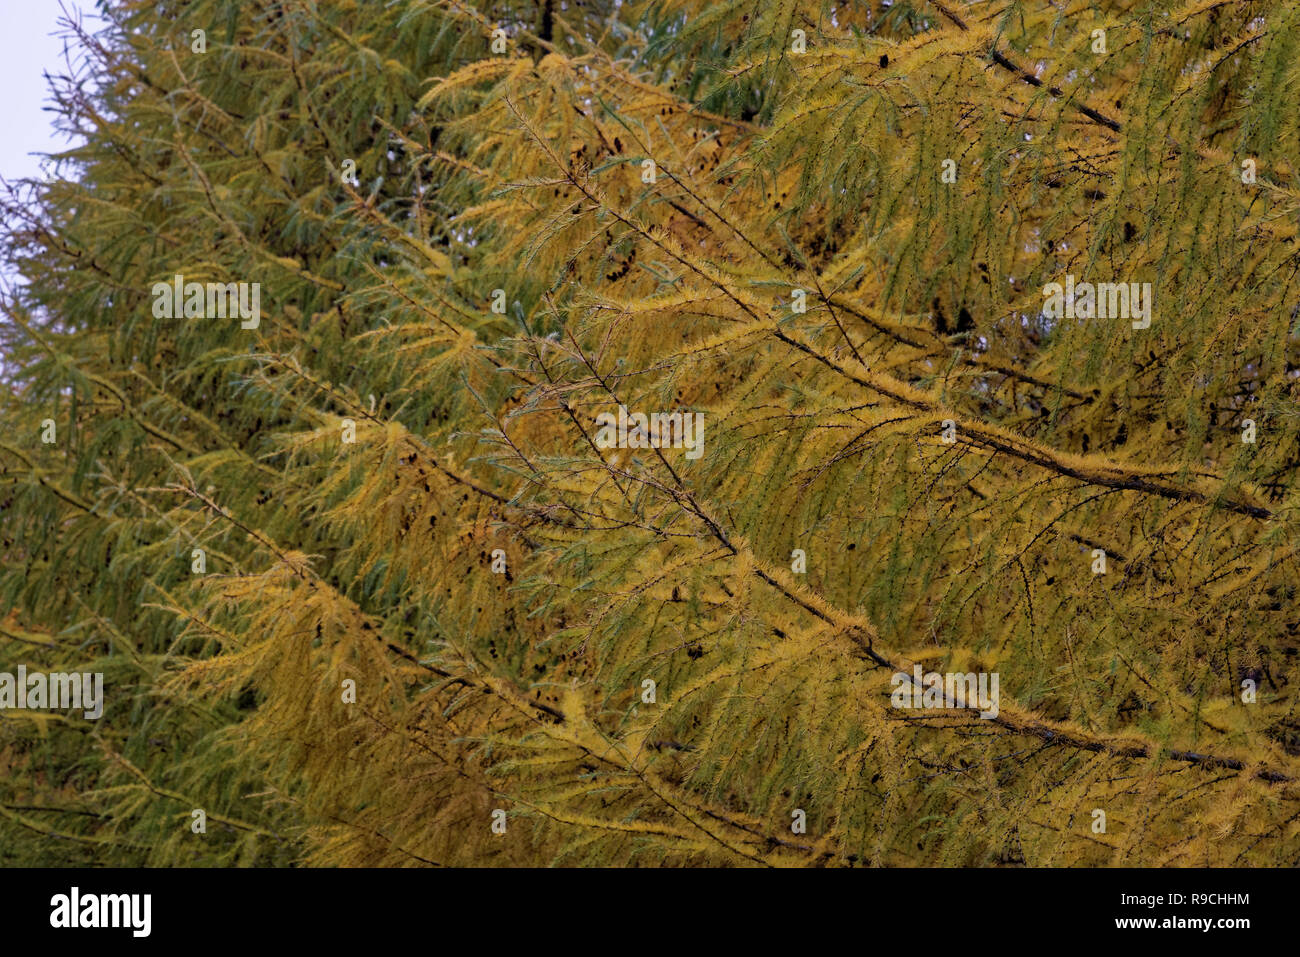 Colorful larch trees with female strobili in November Stock Photo